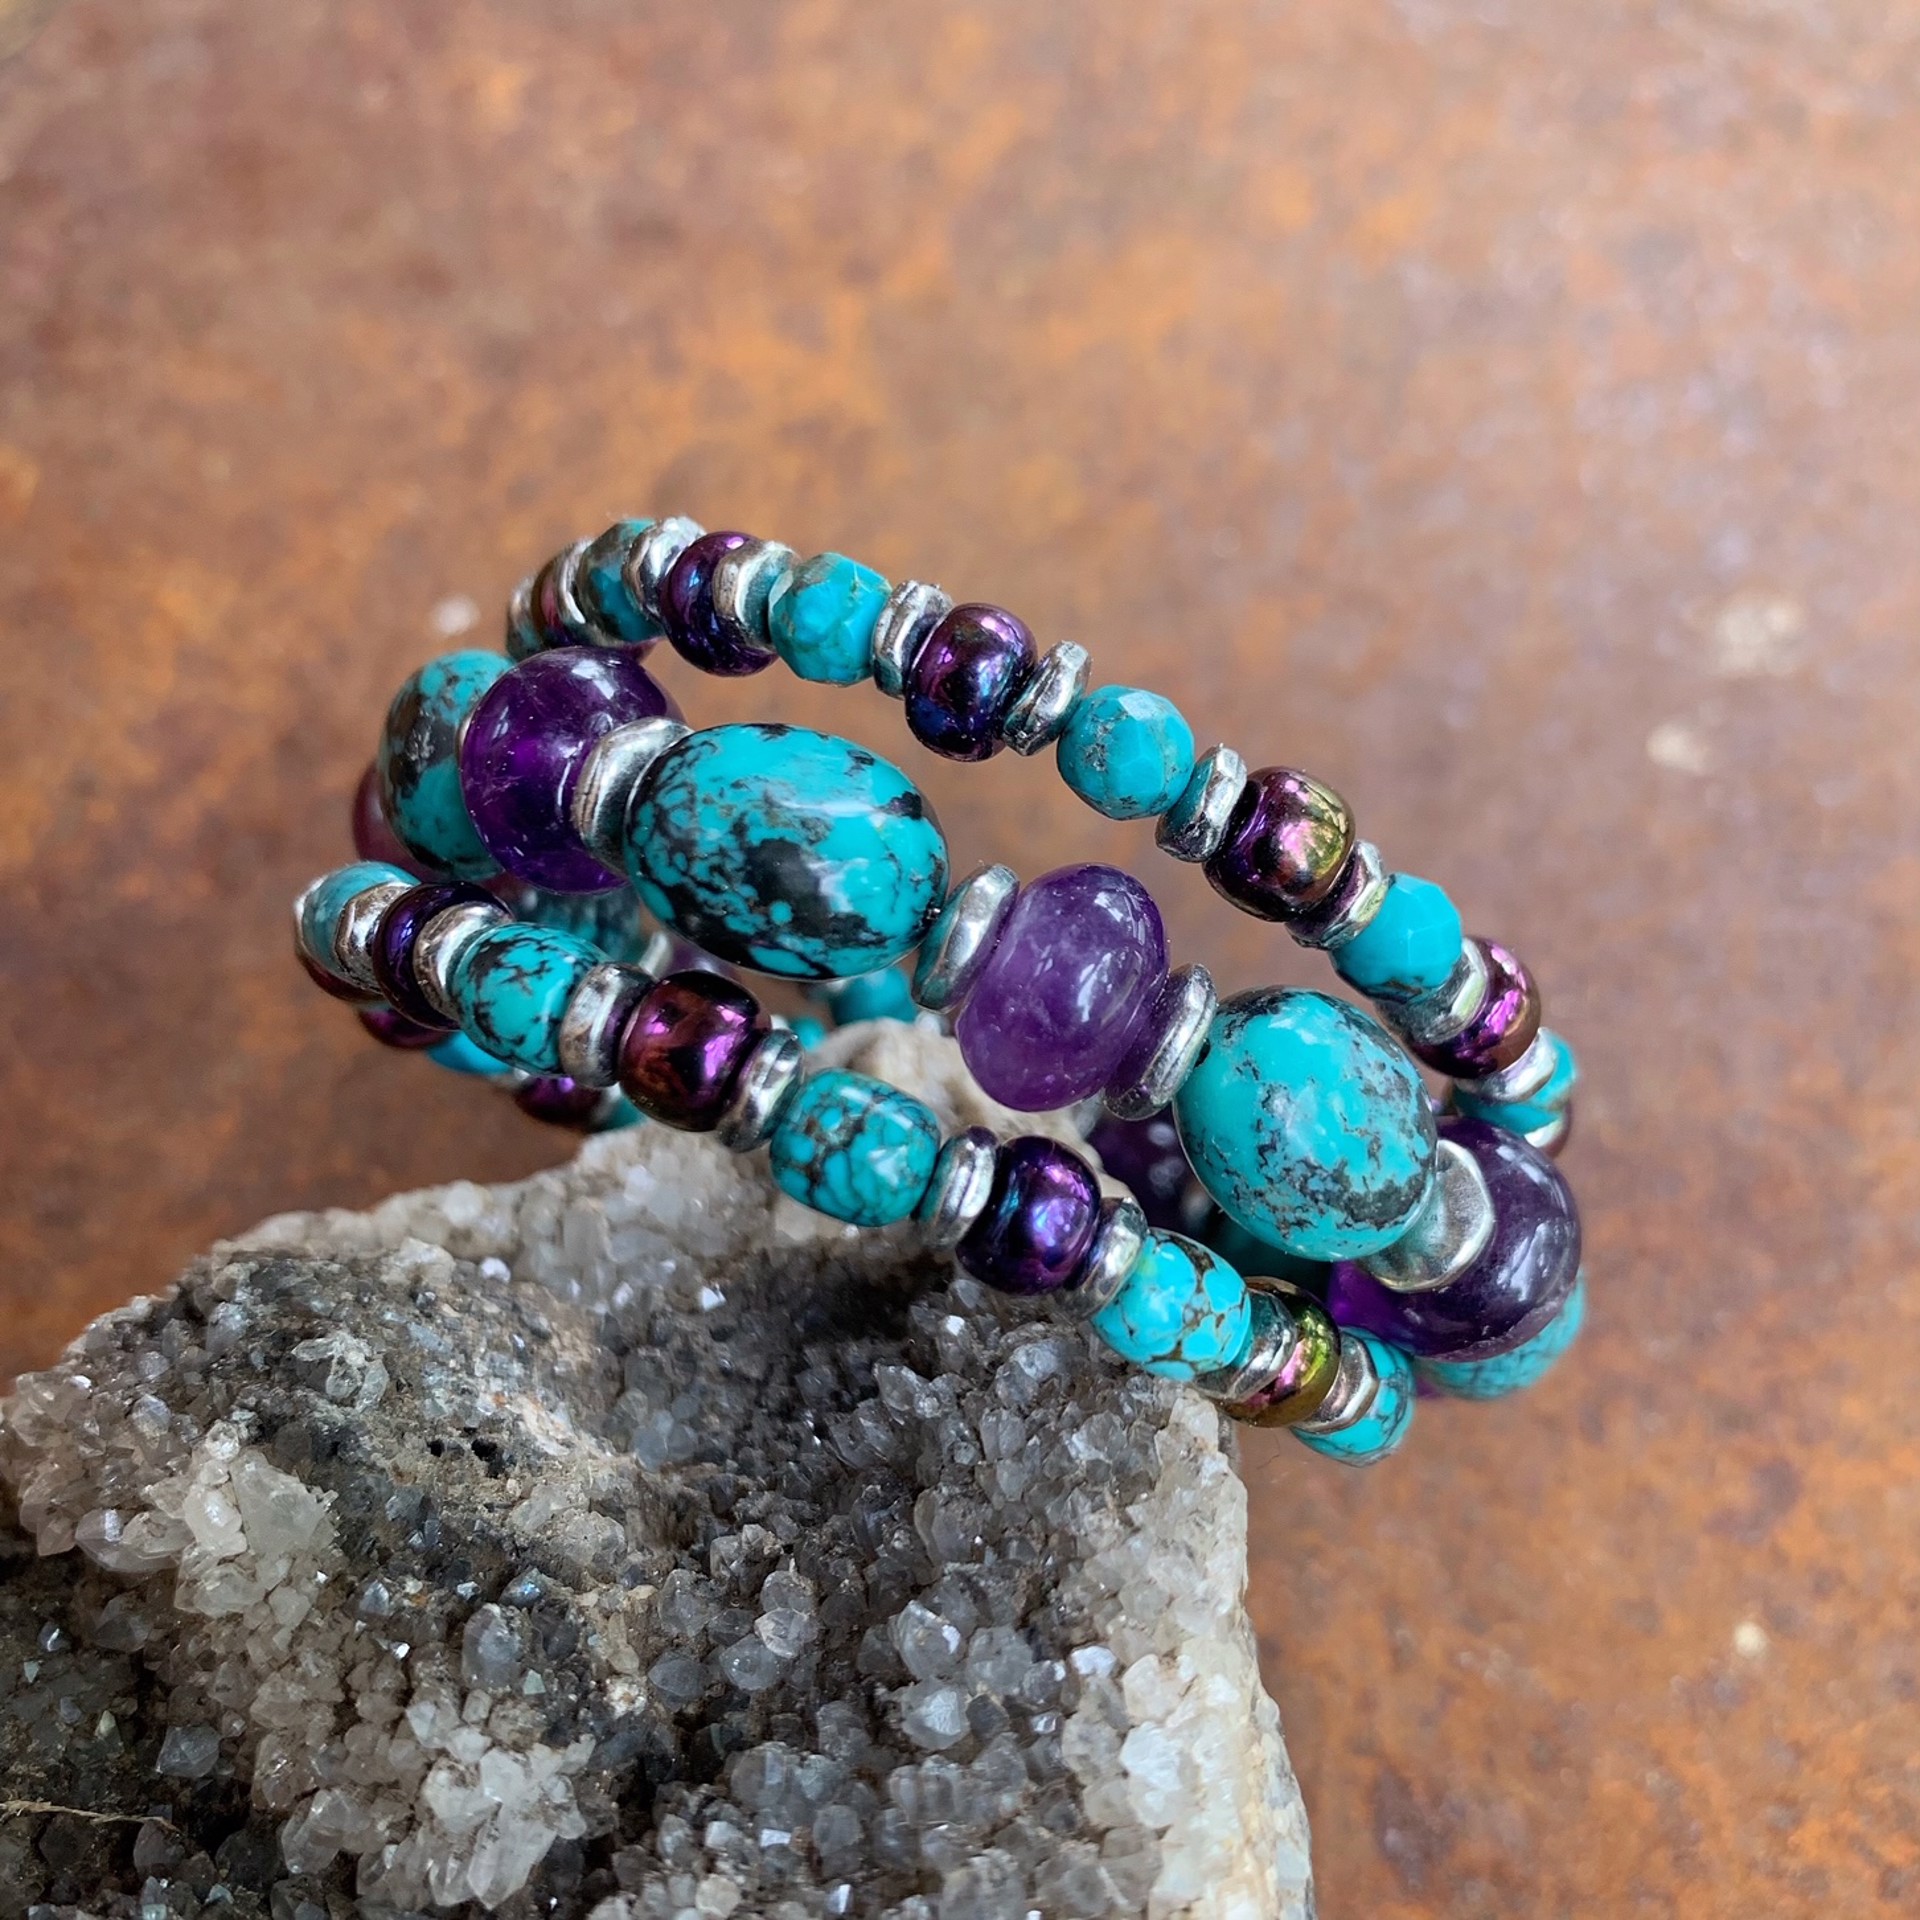 K864 Turquoise and Amethyst Wrap Bracelet by Kelly Ormsby